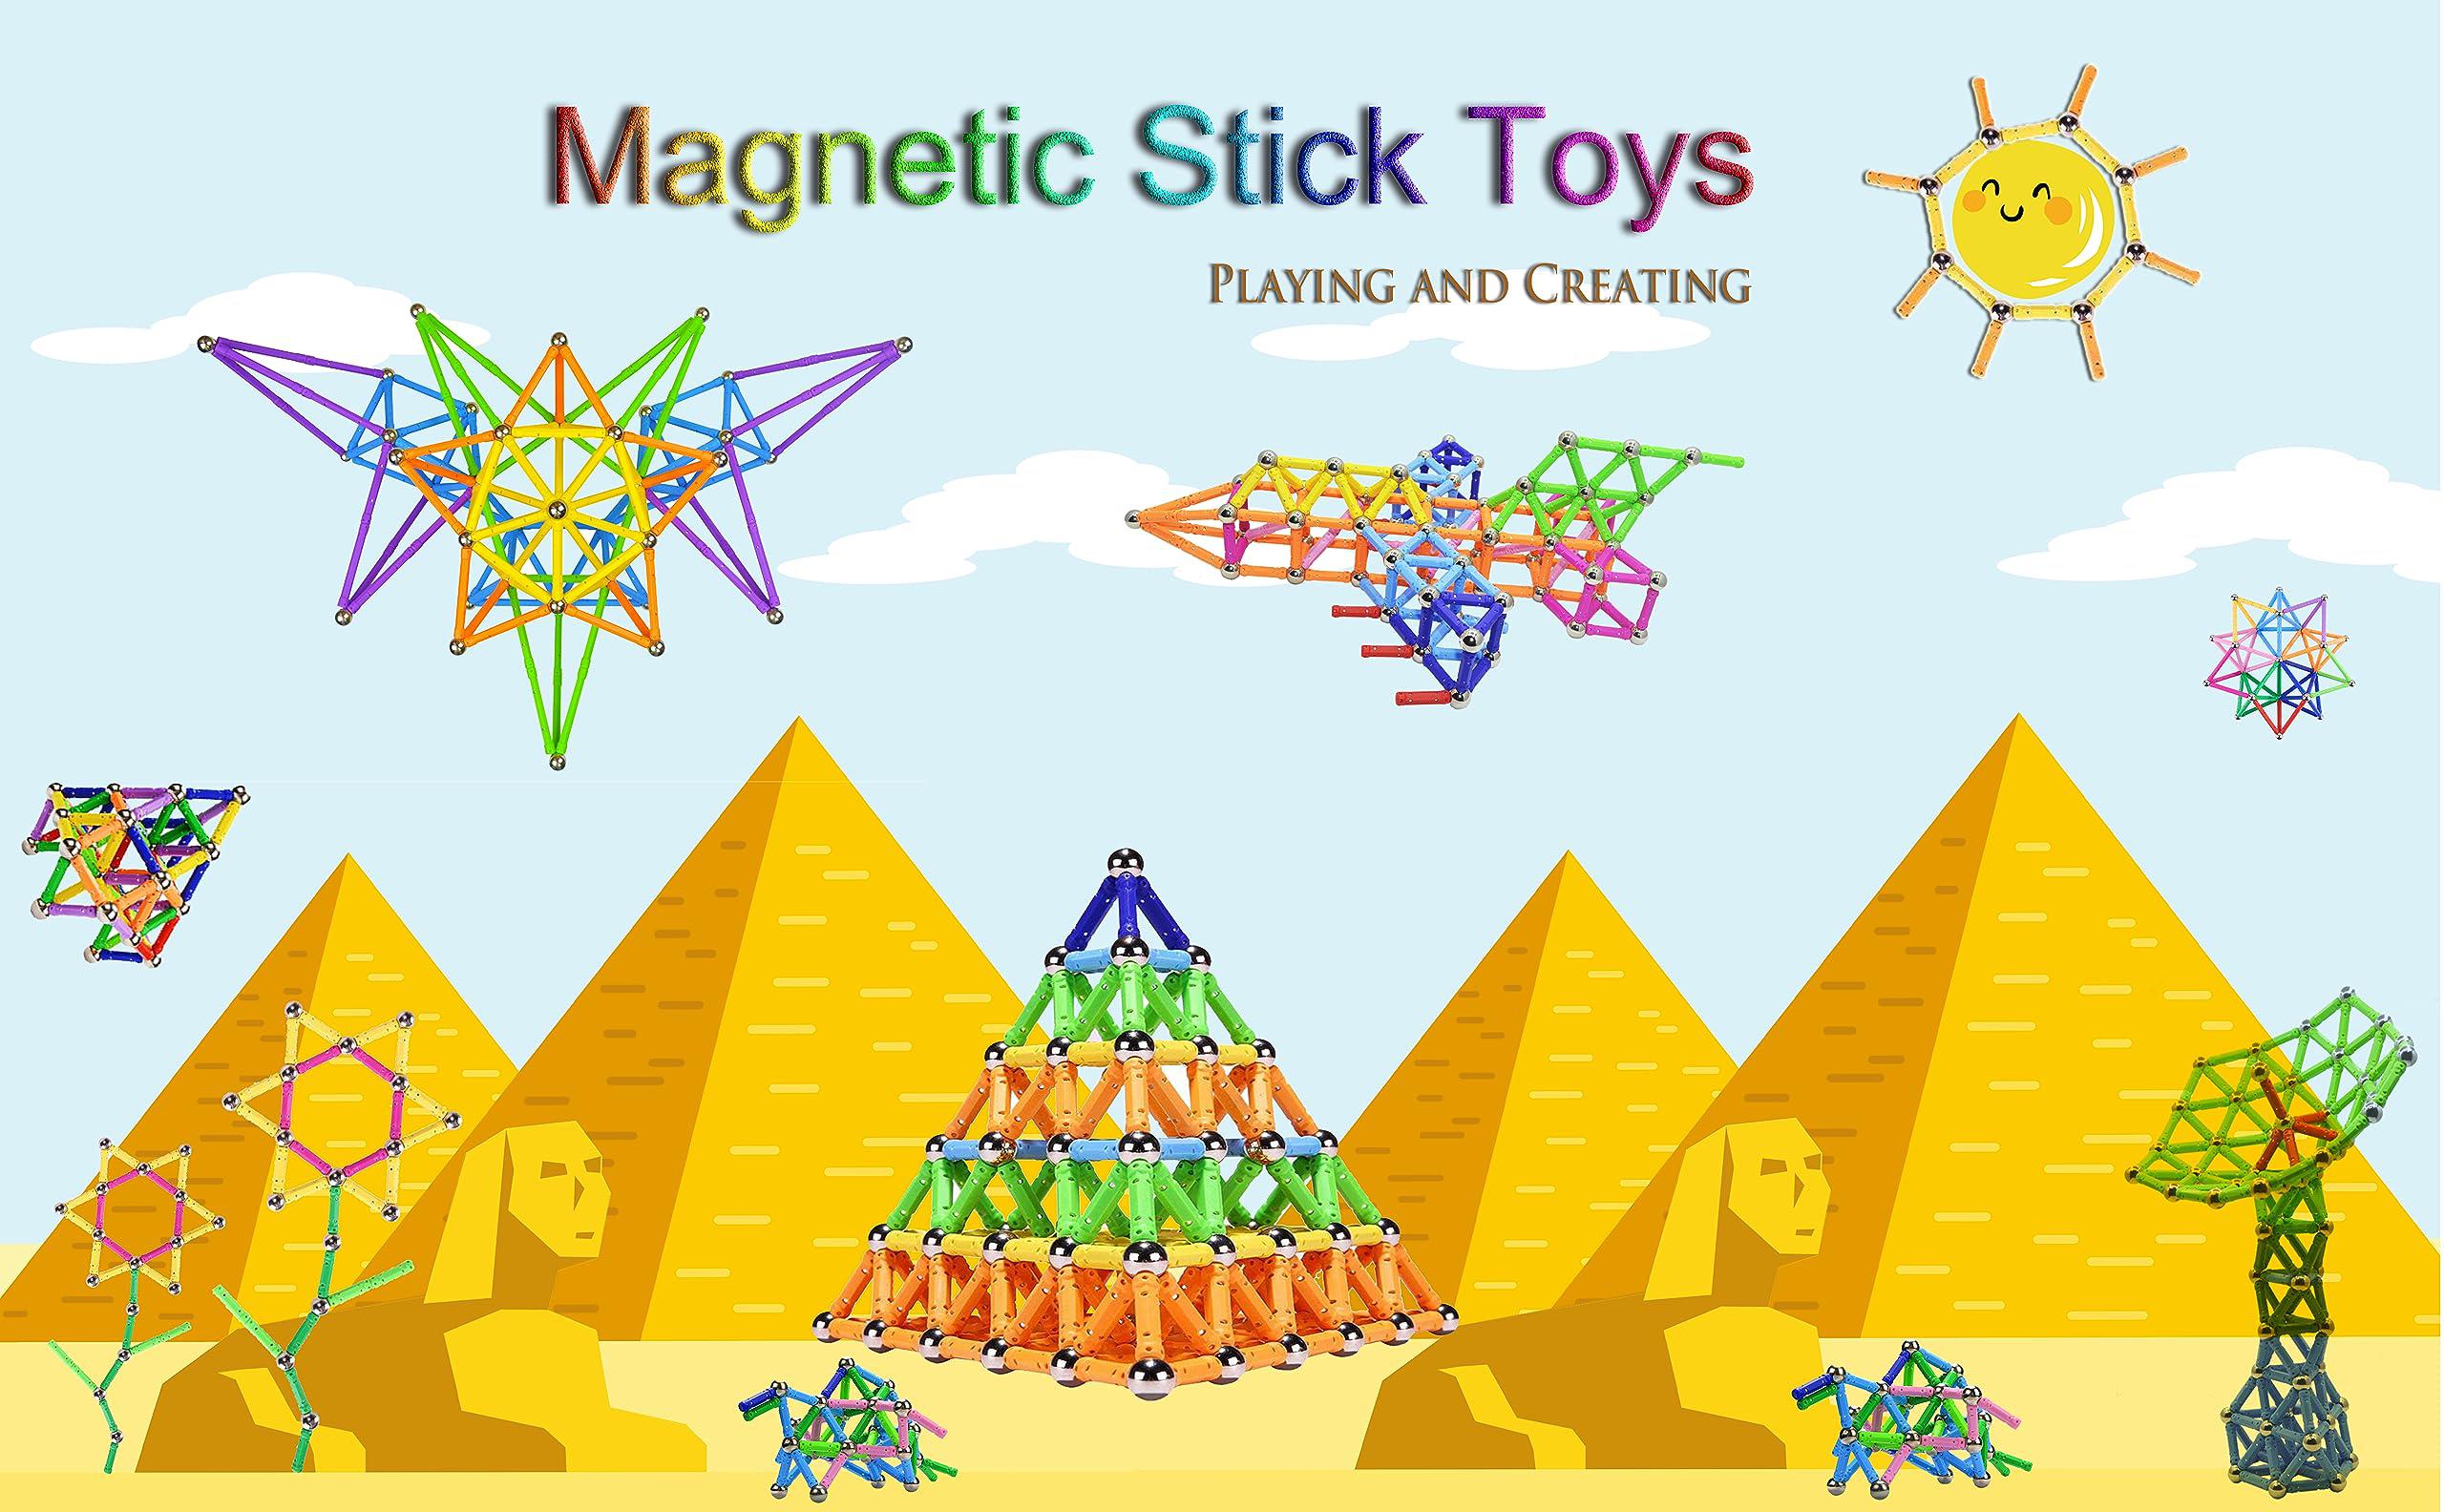 veatree game 206pcs magnetic building sticks blocks toys, magnet educational toys stem toys for kids and adult, 3d non-toxic 